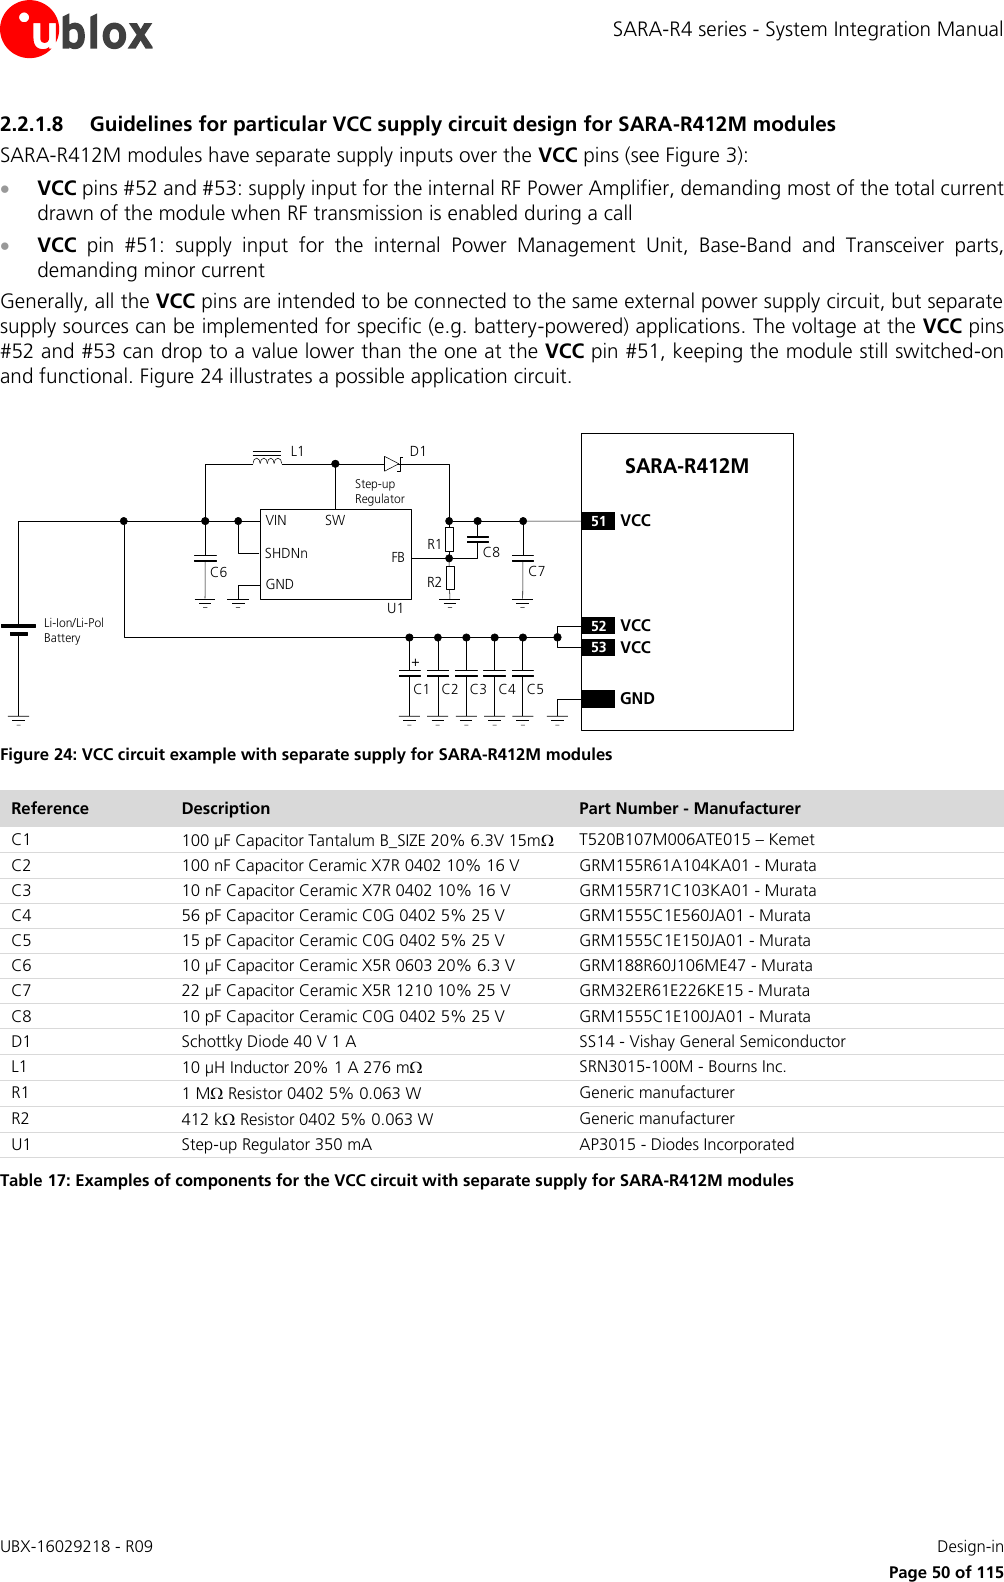 SARA-R4 series - System Integration Manual UBX-16029218 - R09    Design-in     Page 50 of 115 2.2.1.8 Guidelines for particular VCC supply circuit design for SARA-R412M modules SARA-R412M modules have separate supply inputs over the VCC pins (see Figure 3):  VCC pins #52 and #53: supply input for the internal RF Power Amplifier, demanding most of the total current drawn of the module when RF transmission is enabled during a call  VCC  pin  #51:  supply  input  for  the  internal  Power  Management  Unit,  Base-Band  and  Transceiver  parts, demanding minor current  Generally, all the VCC pins are intended to be connected to the same external power supply circuit, but separate supply sources can be implemented for specific (e.g. battery-powered) applications. The voltage at the VCC pins #52 and #53 can drop to a value lower than the one at the VCC pin #51, keeping the module still switched-on and functional. Figure 24 illustrates a possible application circuit.  C1 C4 GNDC3C2 C5SARA-R412M52 VCC53 VCC51 VCC+Li-Ion/Li-Pol BatteryC6SWVINSHDNnGNDFB C7R1R2L1U1Step-up RegulatorD1C8 Figure 24: VCC circuit example with separate supply for SARA-R412M modules Reference Description Part Number - Manufacturer C1 100 µF Capacitor Tantalum B_SIZE 20% 6.3V 15m T520B107M006ATE015 – Kemet C2 100 nF Capacitor Ceramic X7R 0402 10% 16 V  GRM155R61A104KA01 - Murata  C3 10 nF Capacitor Ceramic X7R 0402 10% 16 V GRM155R71C103KA01 - Murata C4 56 pF Capacitor Ceramic C0G 0402 5% 25 V GRM1555C1E560JA01 - Murata C5 15 pF Capacitor Ceramic C0G 0402 5% 25 V  GRM1555C1E150JA01 - Murata C6 10 µF Capacitor Ceramic X5R 0603 20% 6.3 V GRM188R60J106ME47 - Murata C7 22 µF Capacitor Ceramic X5R 1210 10% 25 V GRM32ER61E226KE15 - Murata C8 10 pF Capacitor Ceramic C0G 0402 5% 25 V  GRM1555C1E100JA01 - Murata D1 Schottky Diode 40 V 1 A SS14 - Vishay General Semiconductor L1 10 µH Inductor 20% 1 A 276 m SRN3015-100M - Bourns Inc. R1 1 M Resistor 0402 5% 0.063 W Generic manufacturer R2 412 k Resistor 0402 5% 0.063 W Generic manufacturer U1 Step-up Regulator 350 mA AP3015 - Diodes Incorporated Table 17: Examples of components for the VCC circuit with separate supply for SARA-R412M modules  